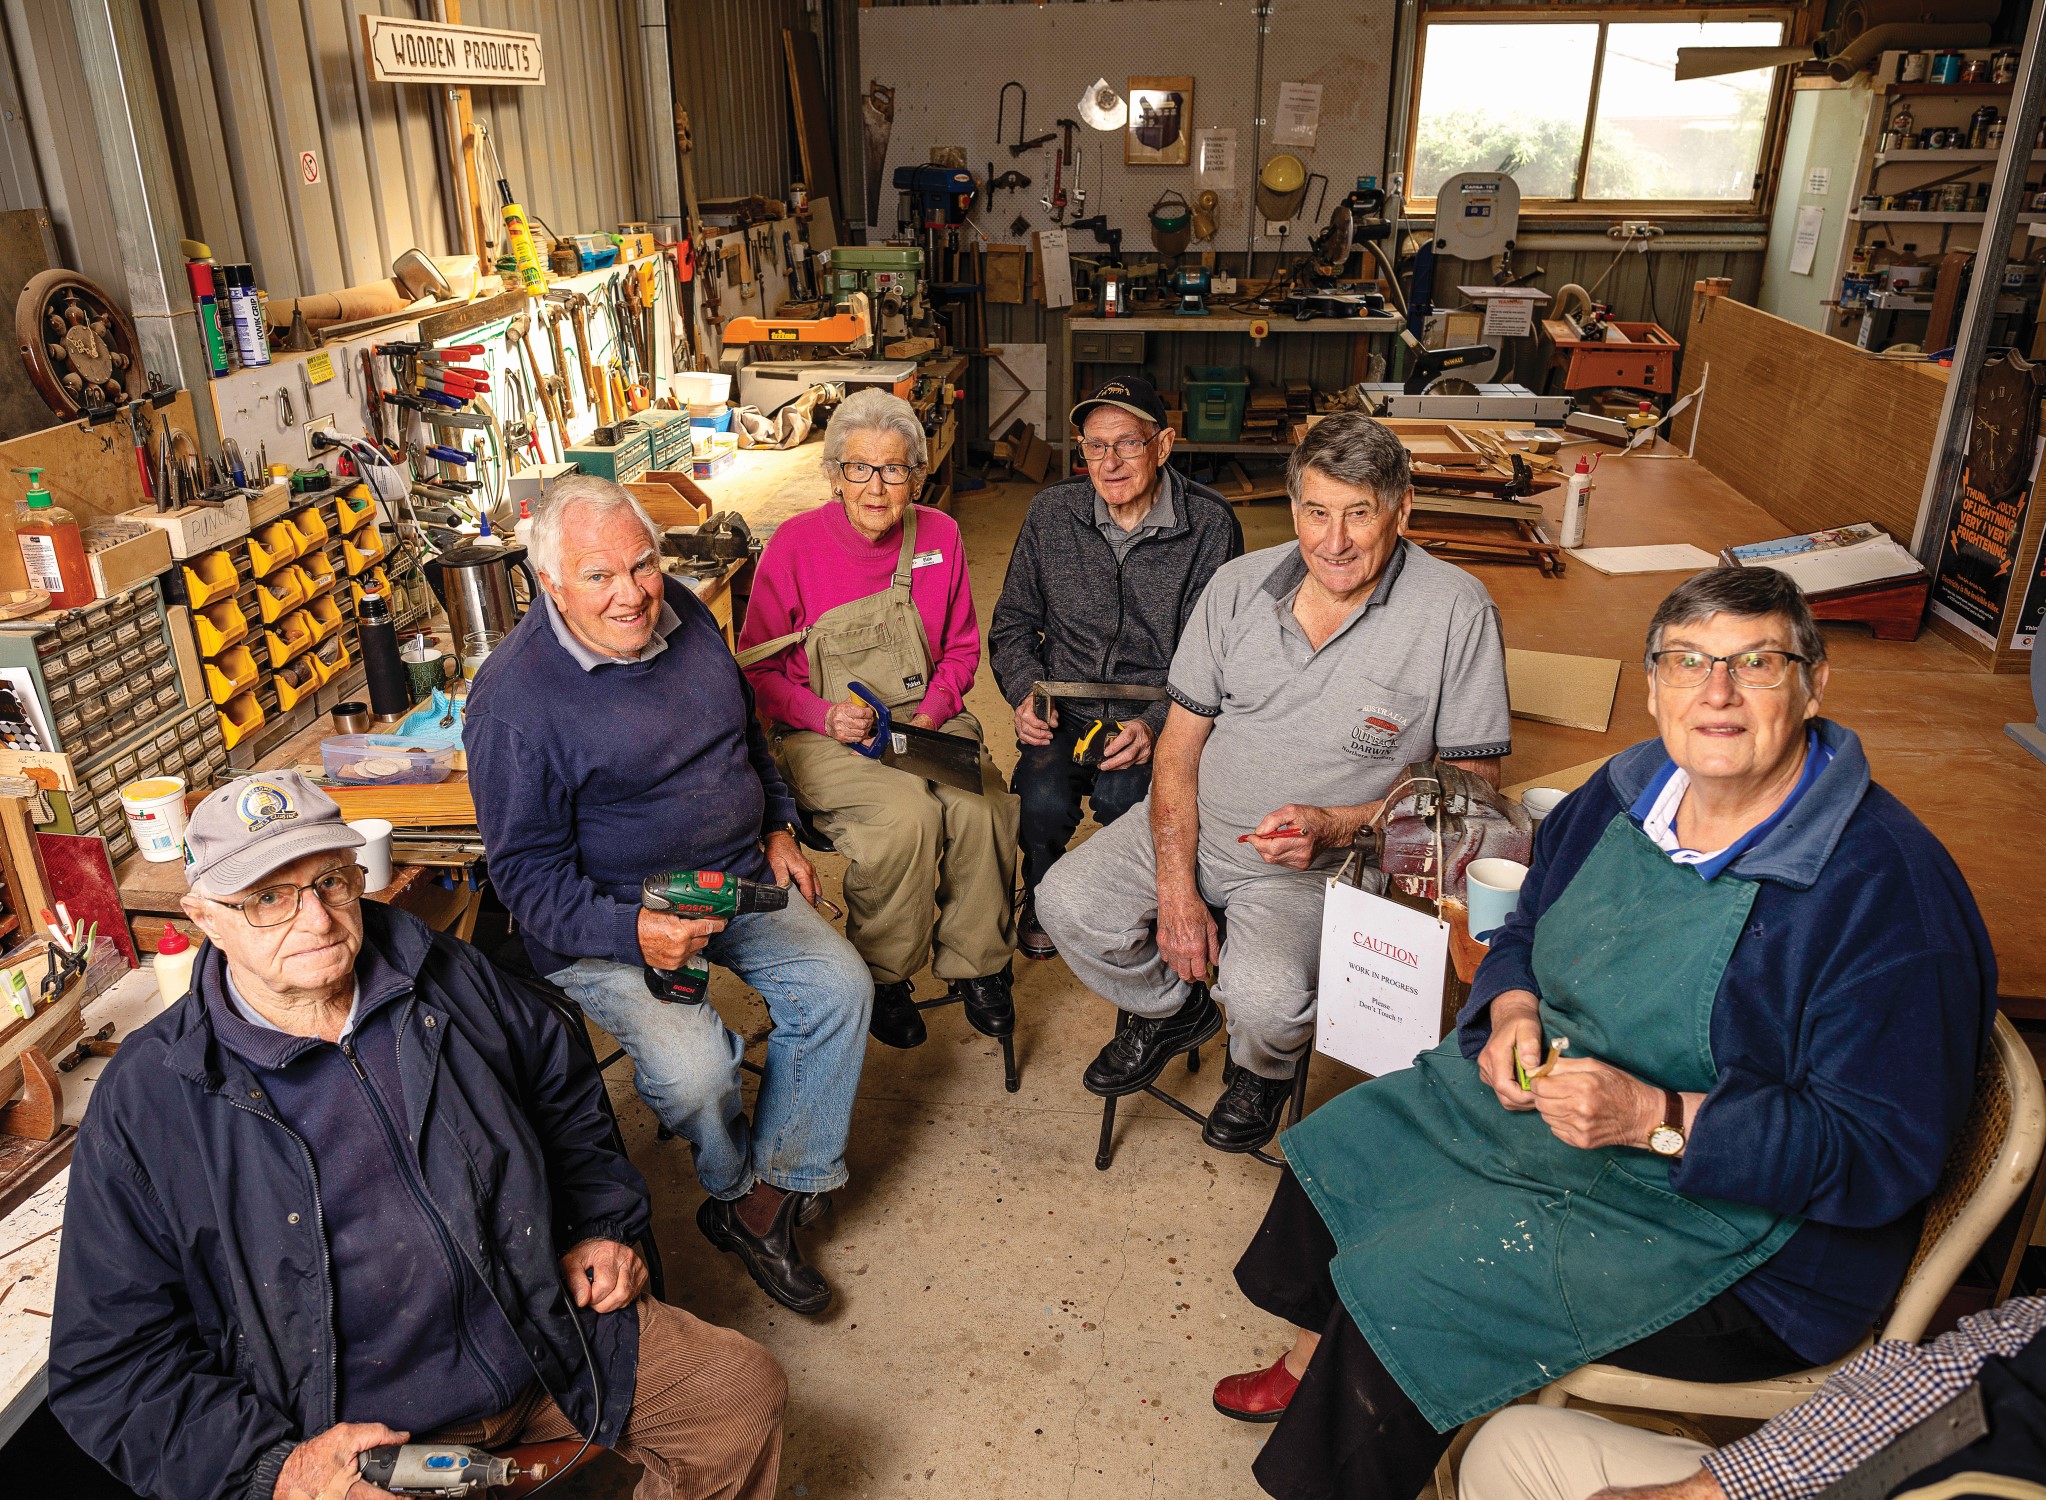 The Men’s Shed at Australian Unity’s Geelong Grove Retirement Village